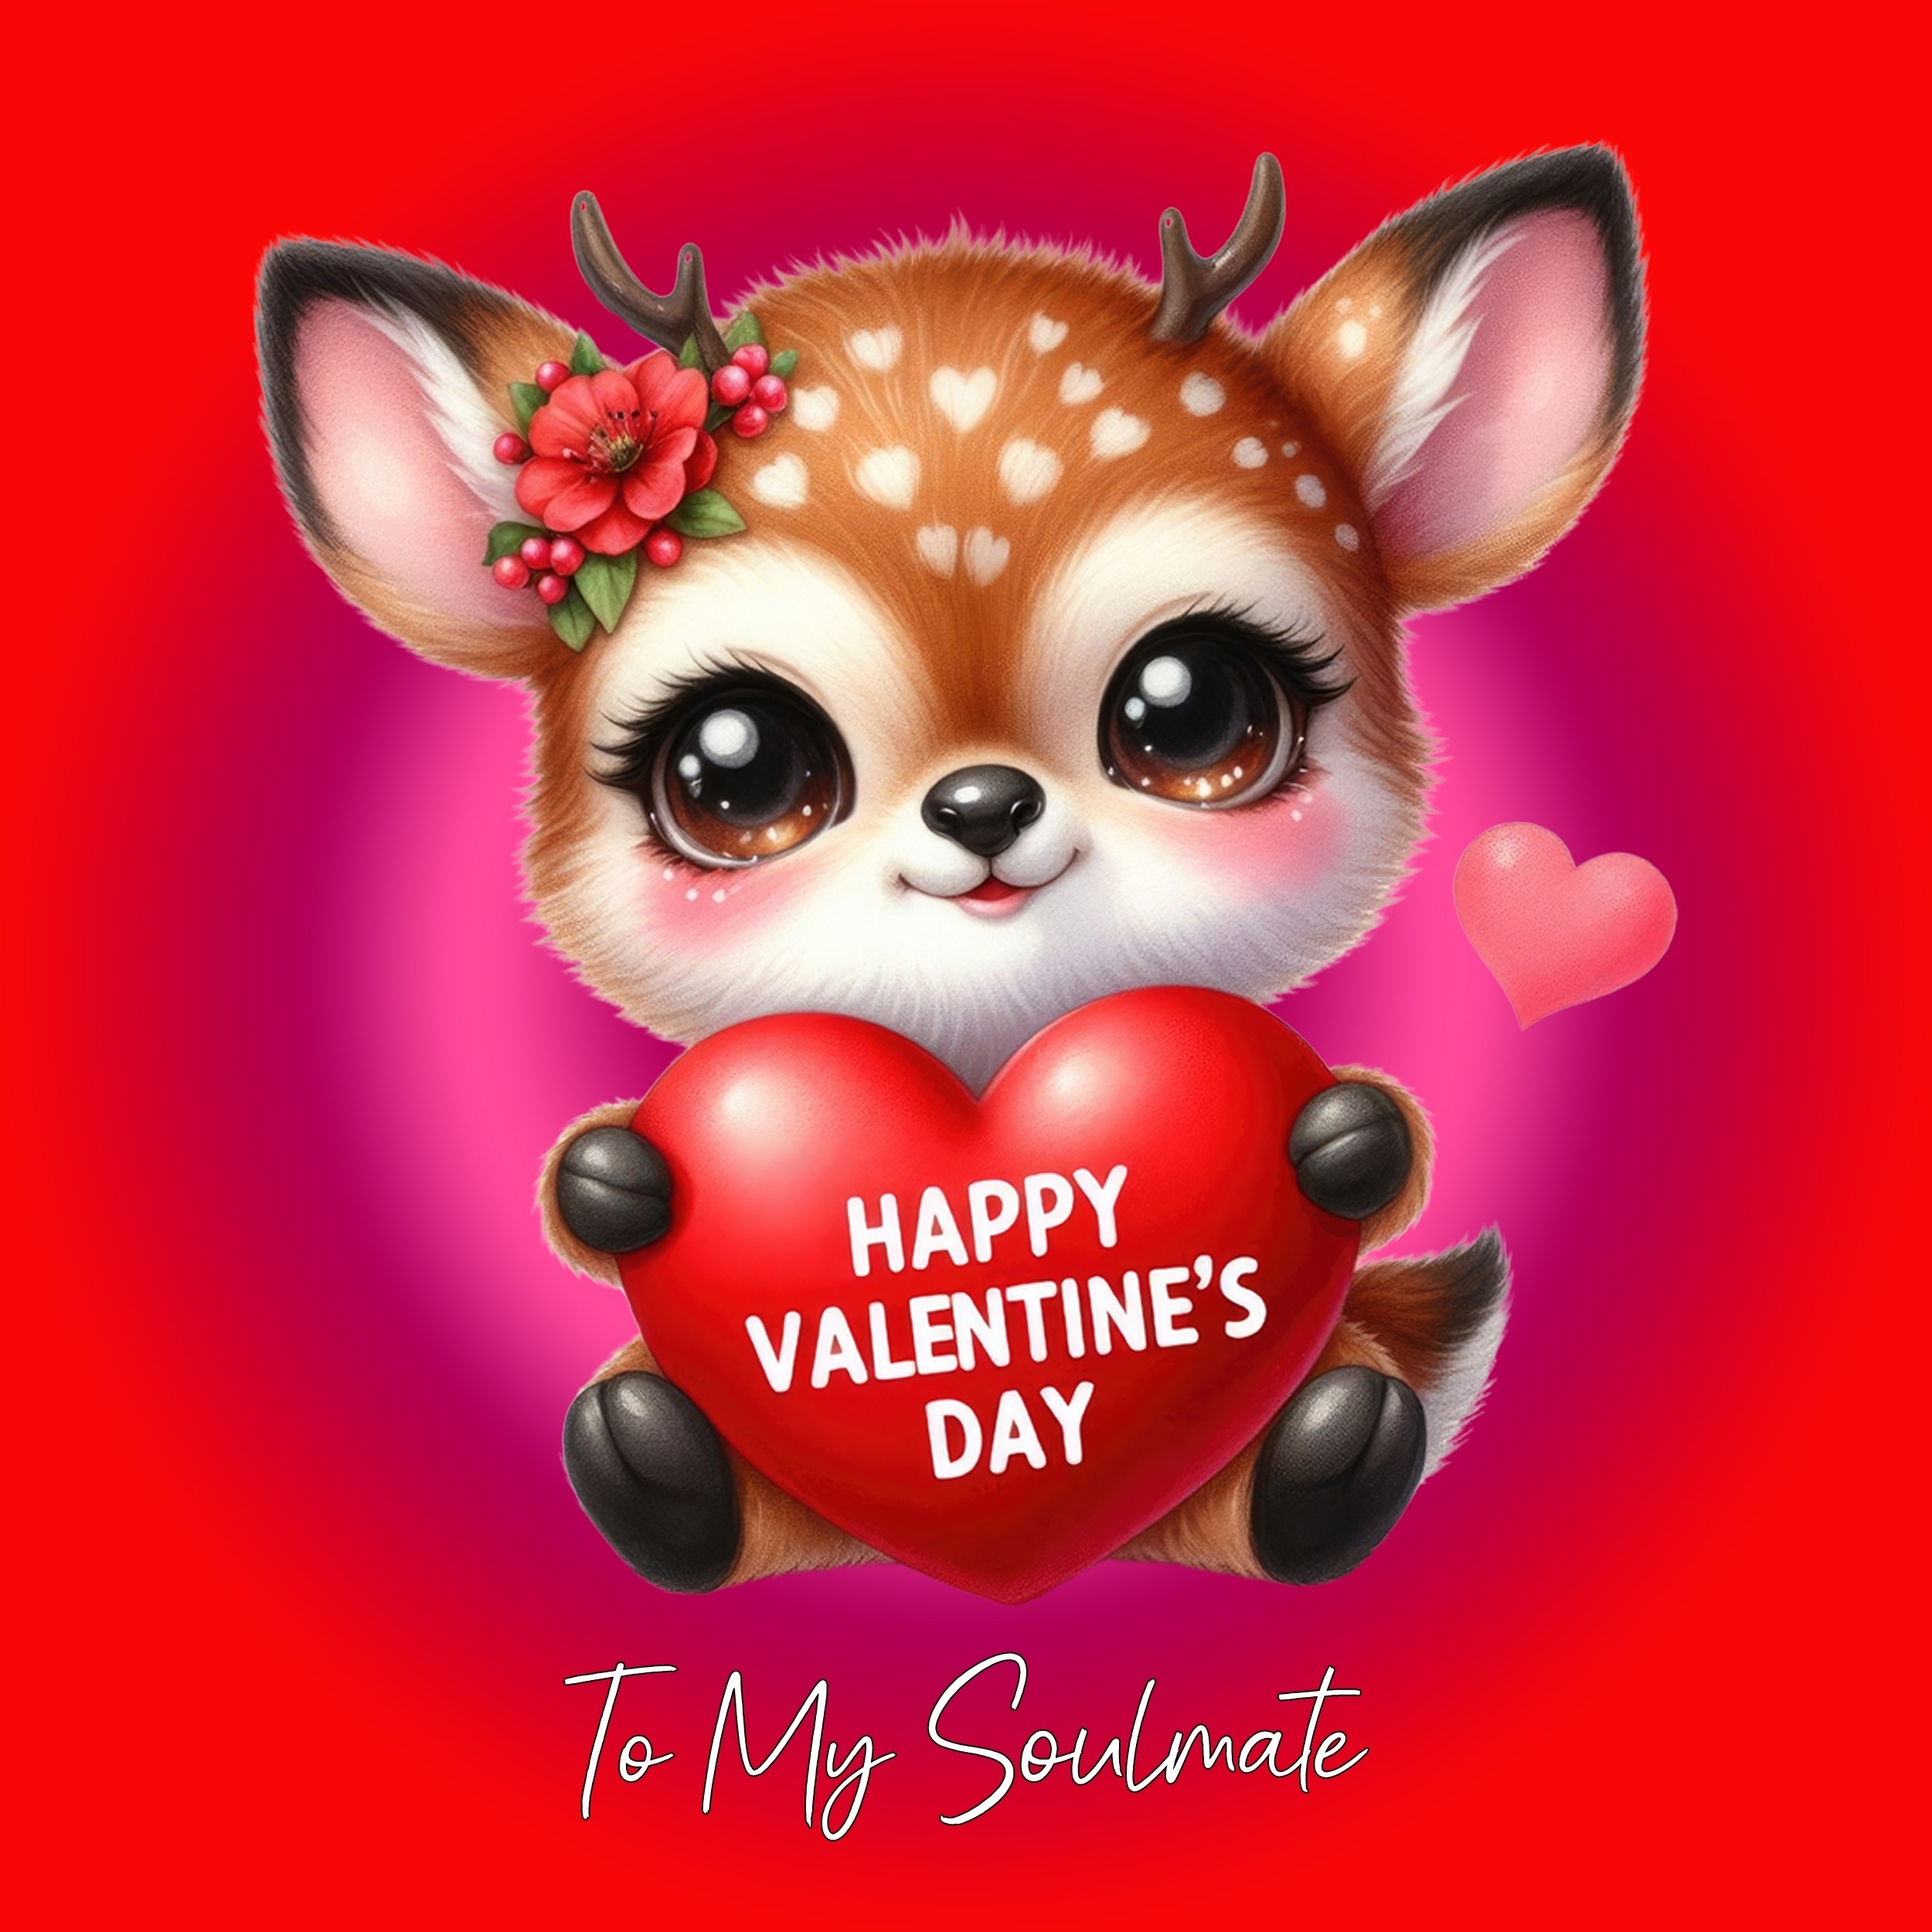 Valentines Day Square Card for Soulmate (Deer)